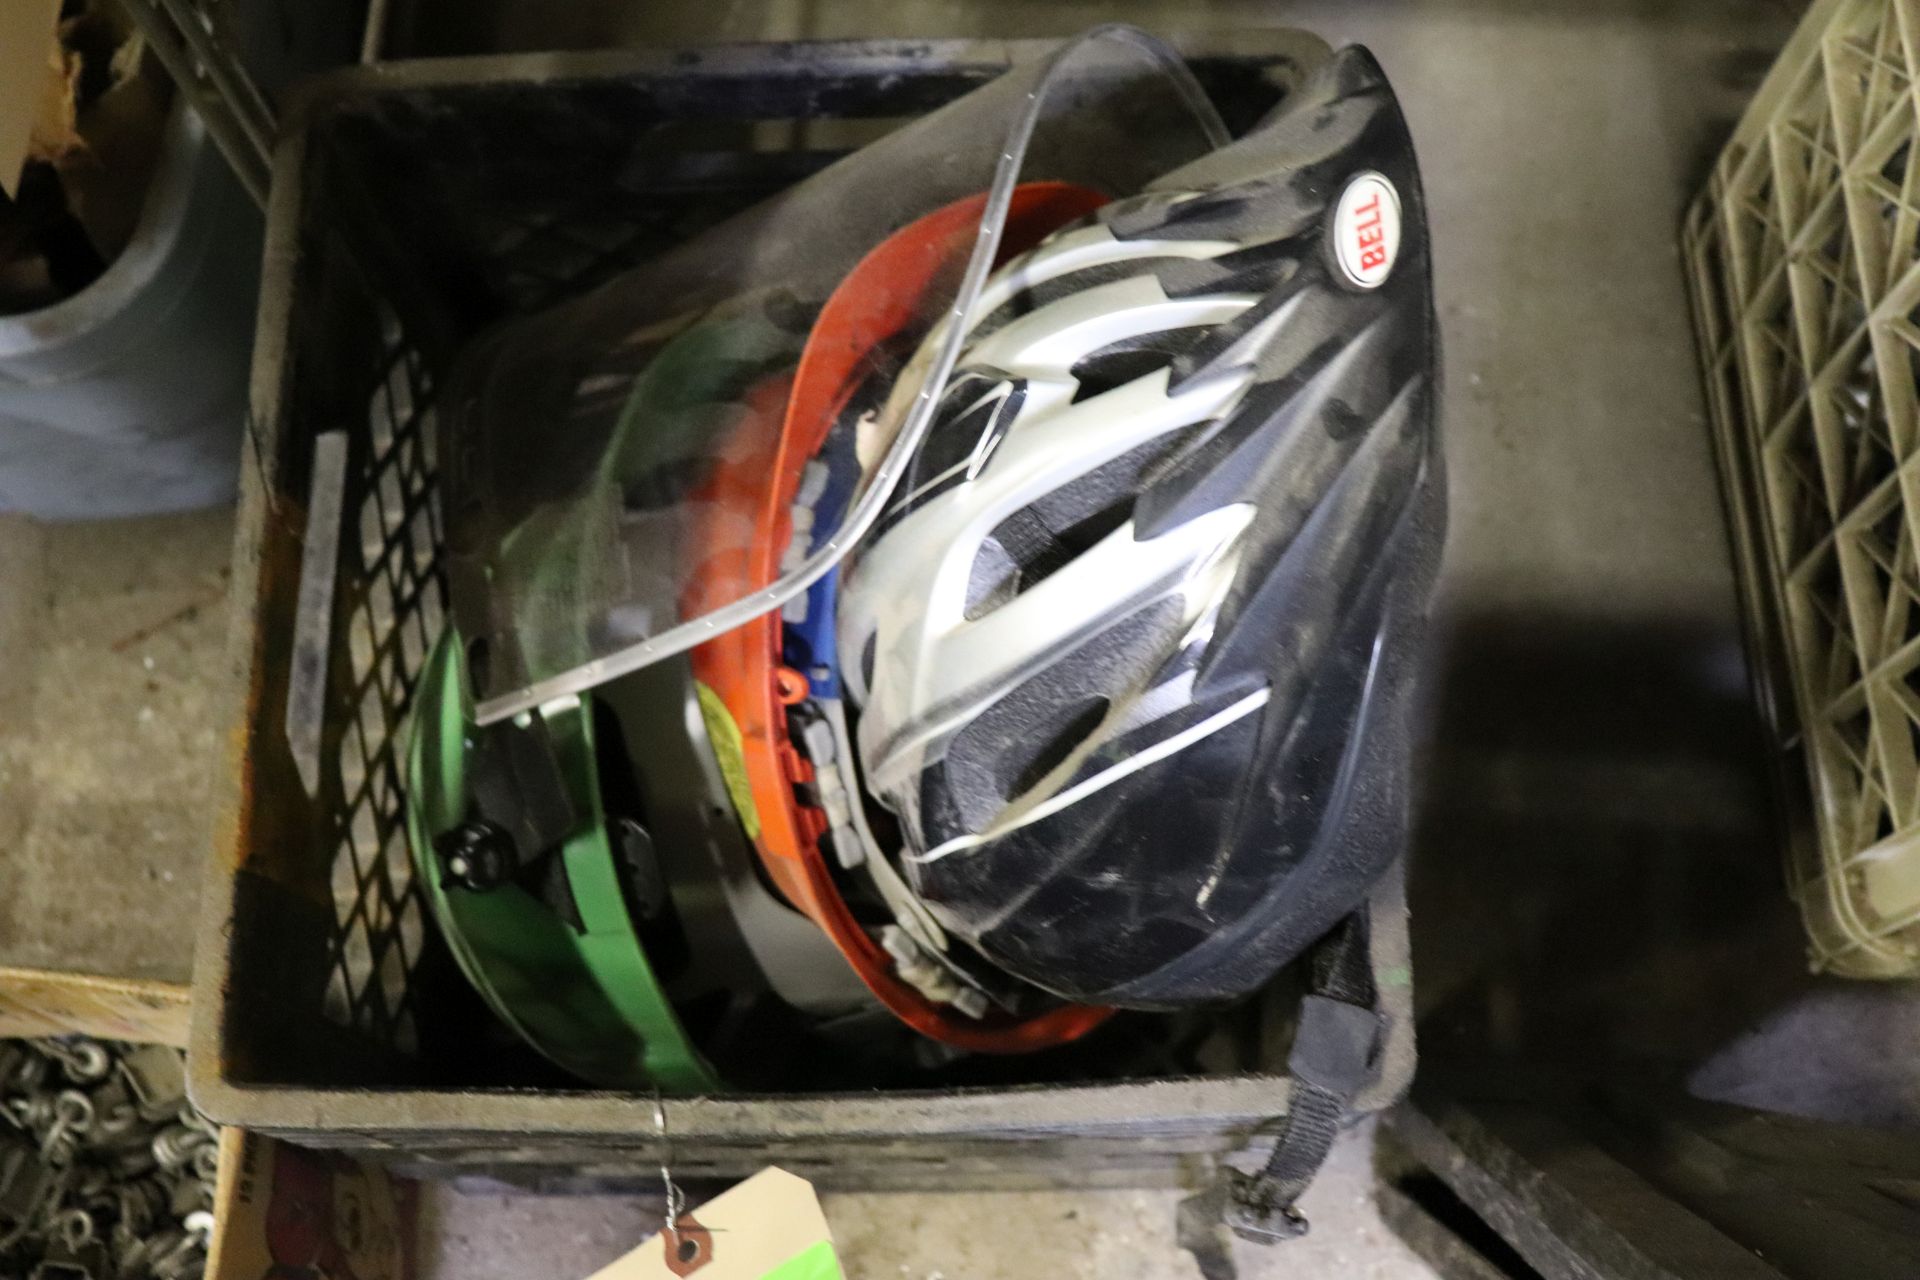 Group: bike helmet, two hard hats, one with face shield